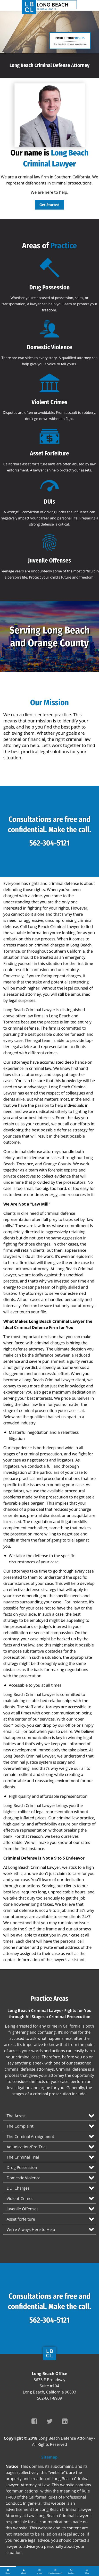 The Law Offices of David J. Givot - Long Beach CA Lawyers